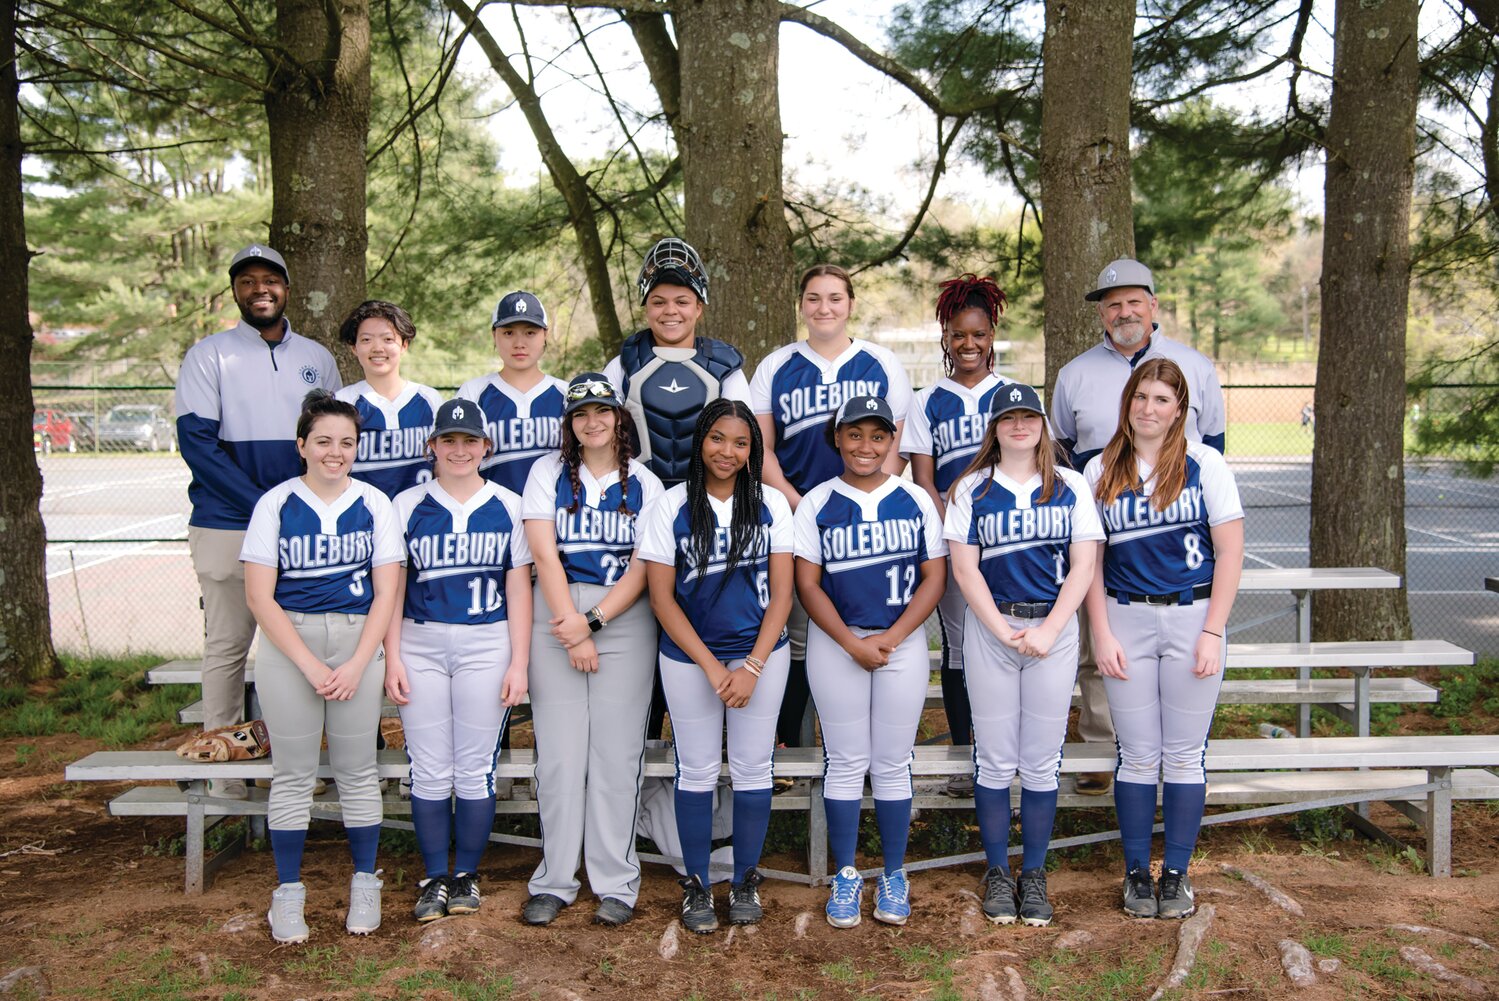 Solebury went 7-5 this season and earned a bye in the first round of the Penn-Jersey Athletic Association Softball Tournament. From left are: front row, Sabrina Stumpo, Bella Barrigh, Emi Armbruster, Naleli Copeland, Jordan Lane, Alexa Nichols and Mackenzie Costo; second row, assistant coach Keson Bullock-Brown, August Chen, Ulrica Wu, Sofia Allen, Libby Davis, Zy’Ira Redhead and head coach Don Kaplan.